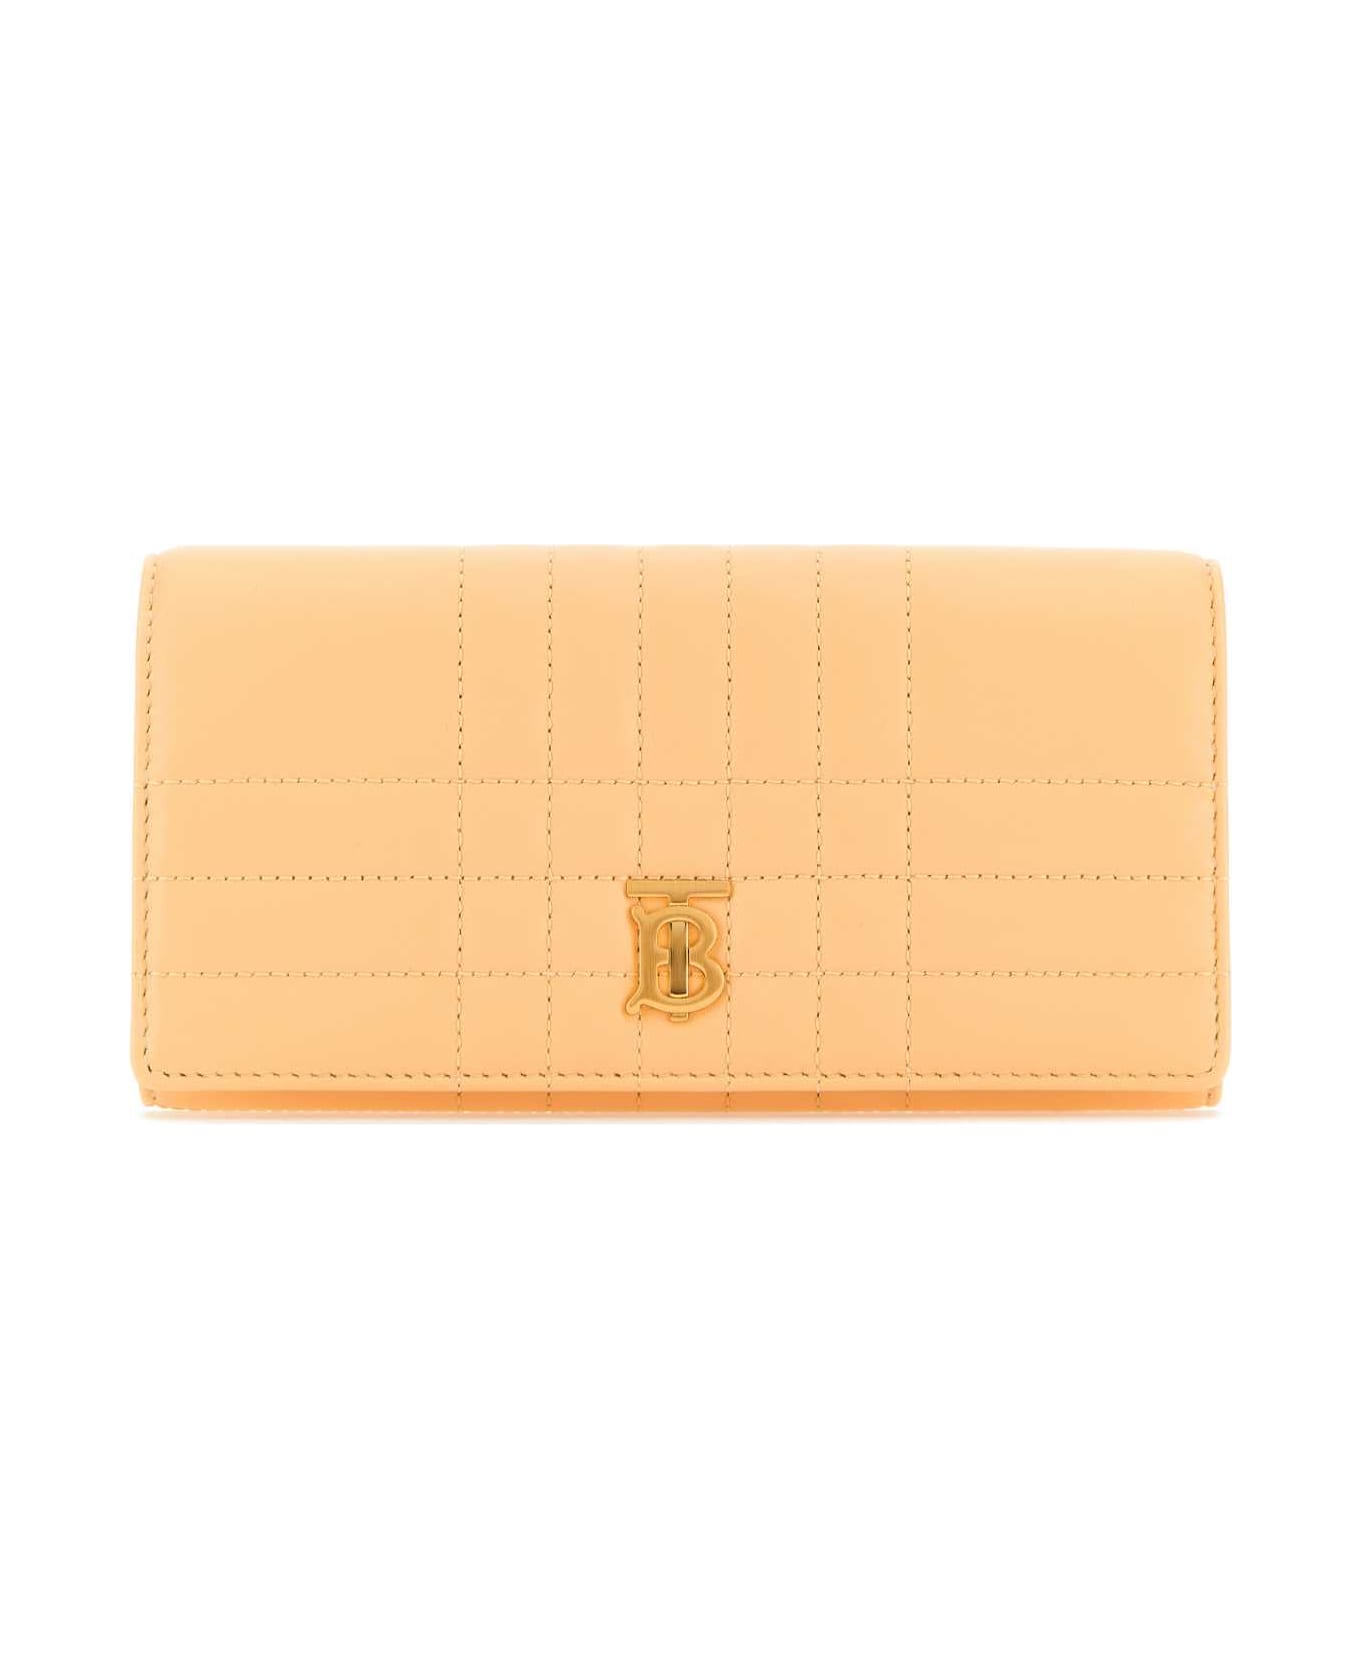 Burberry Peach Leather Lola Wallet - GOLDENSAND